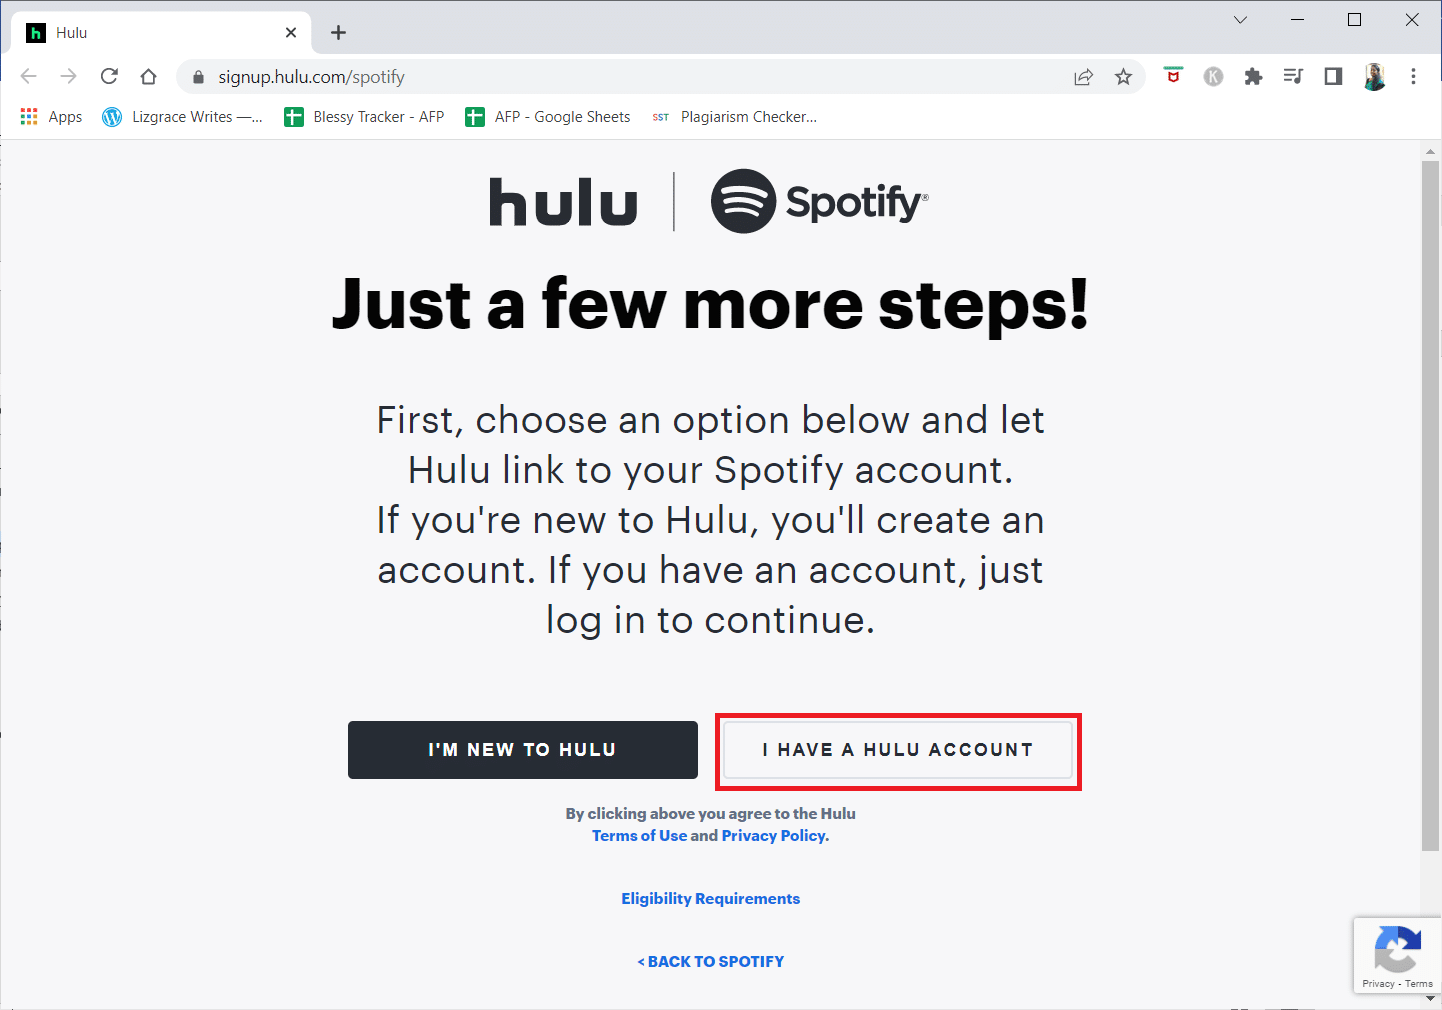 If you already have a Hulu account, click on I HAVE A HULU ACCOUNT